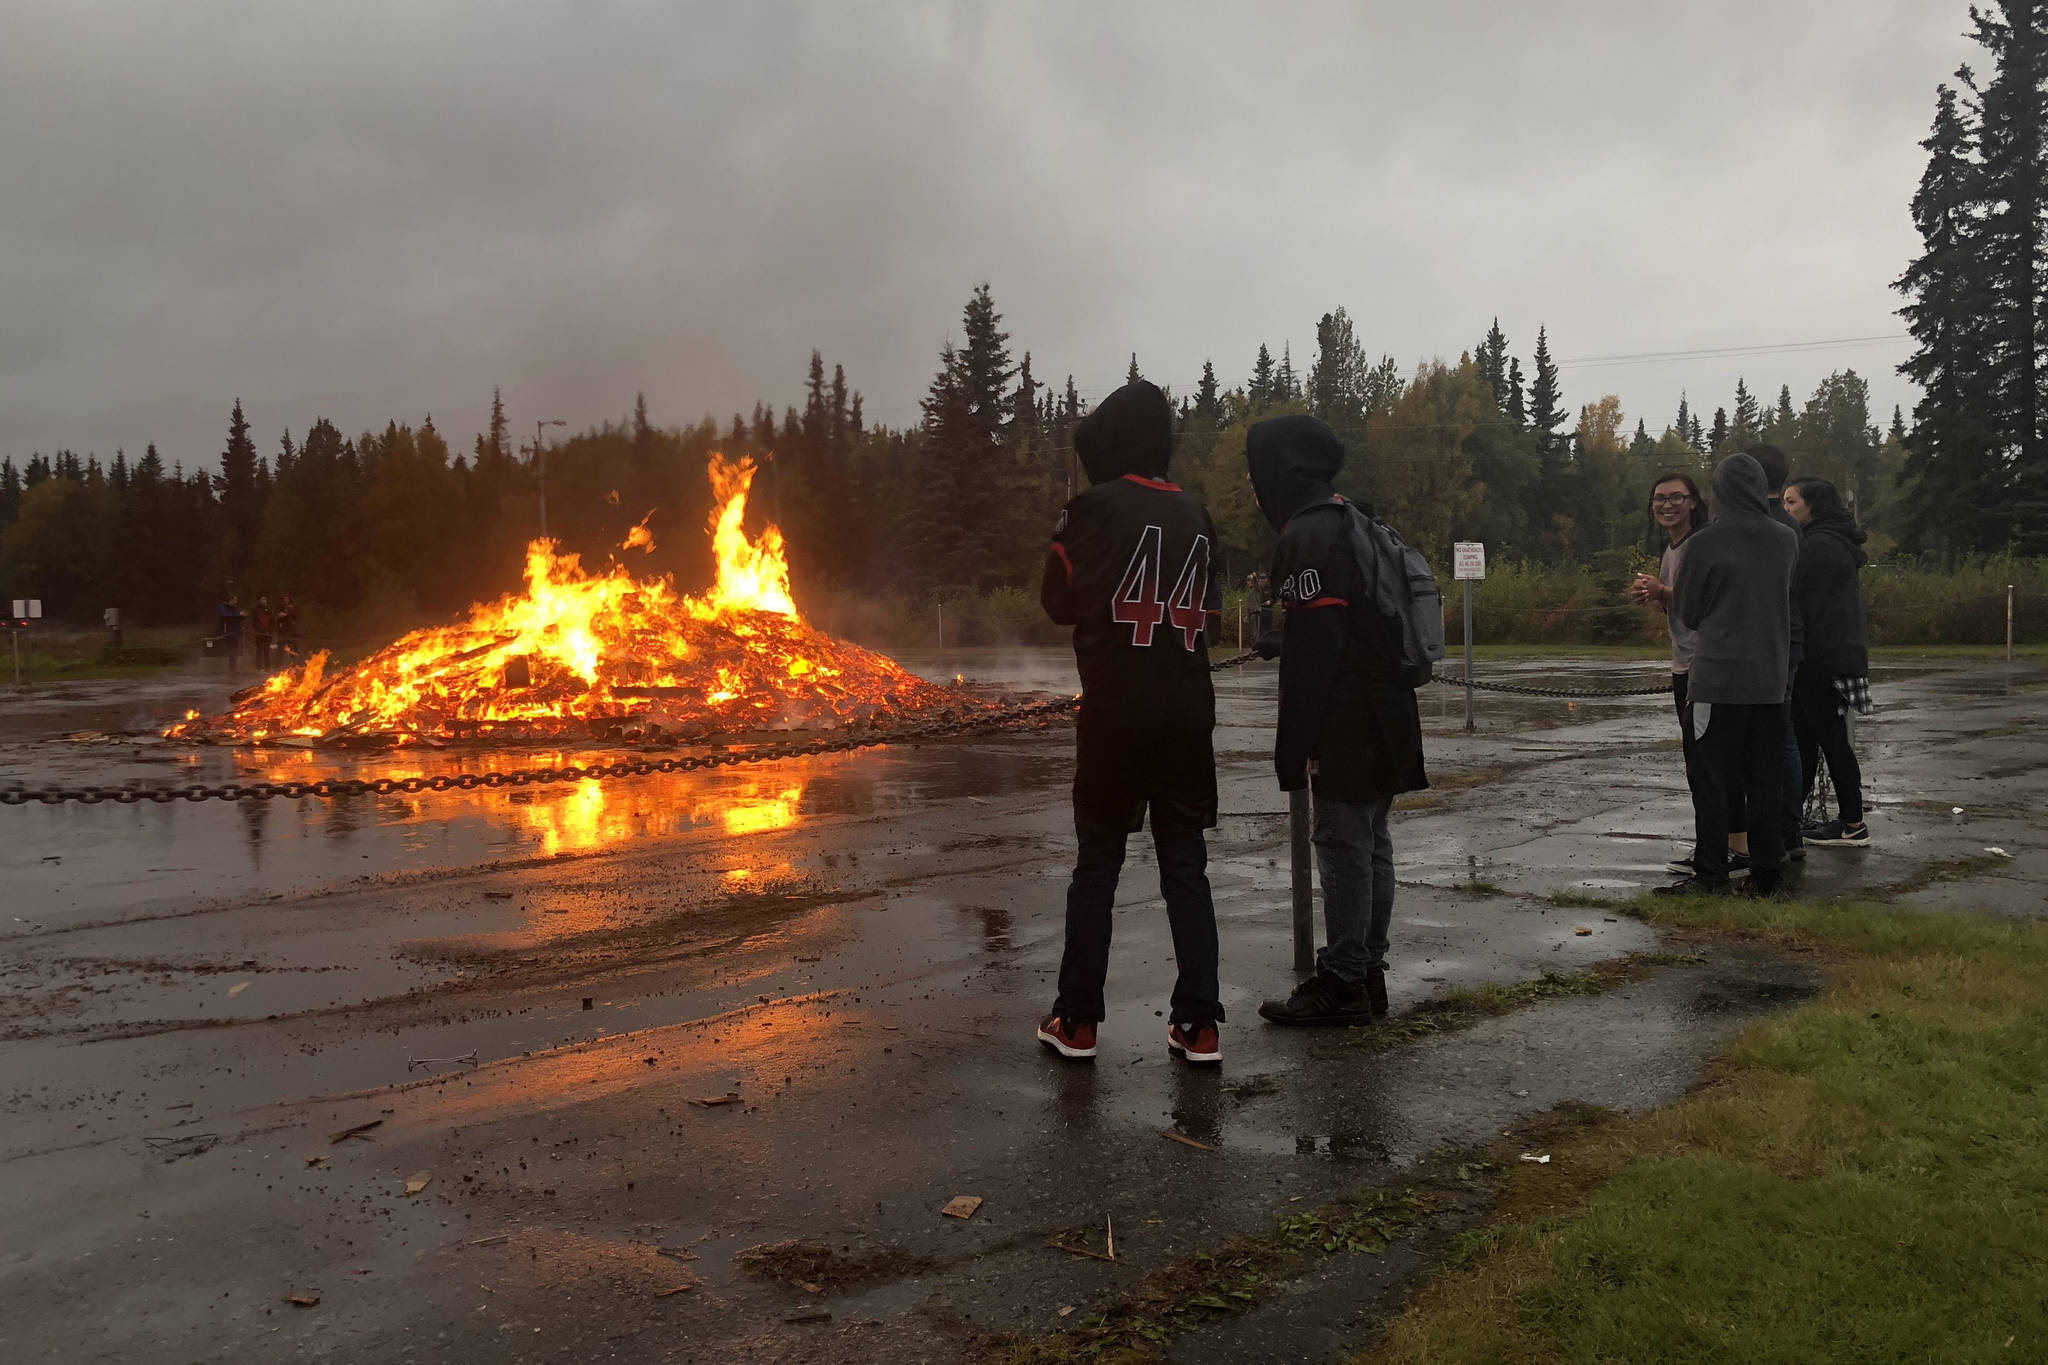 Heavy showers didn’t keep students at Kenai Central High School from celebrating homecoming on Friday in Kenai. (Photo by Victoria Petersen/Peninsula Clarion)